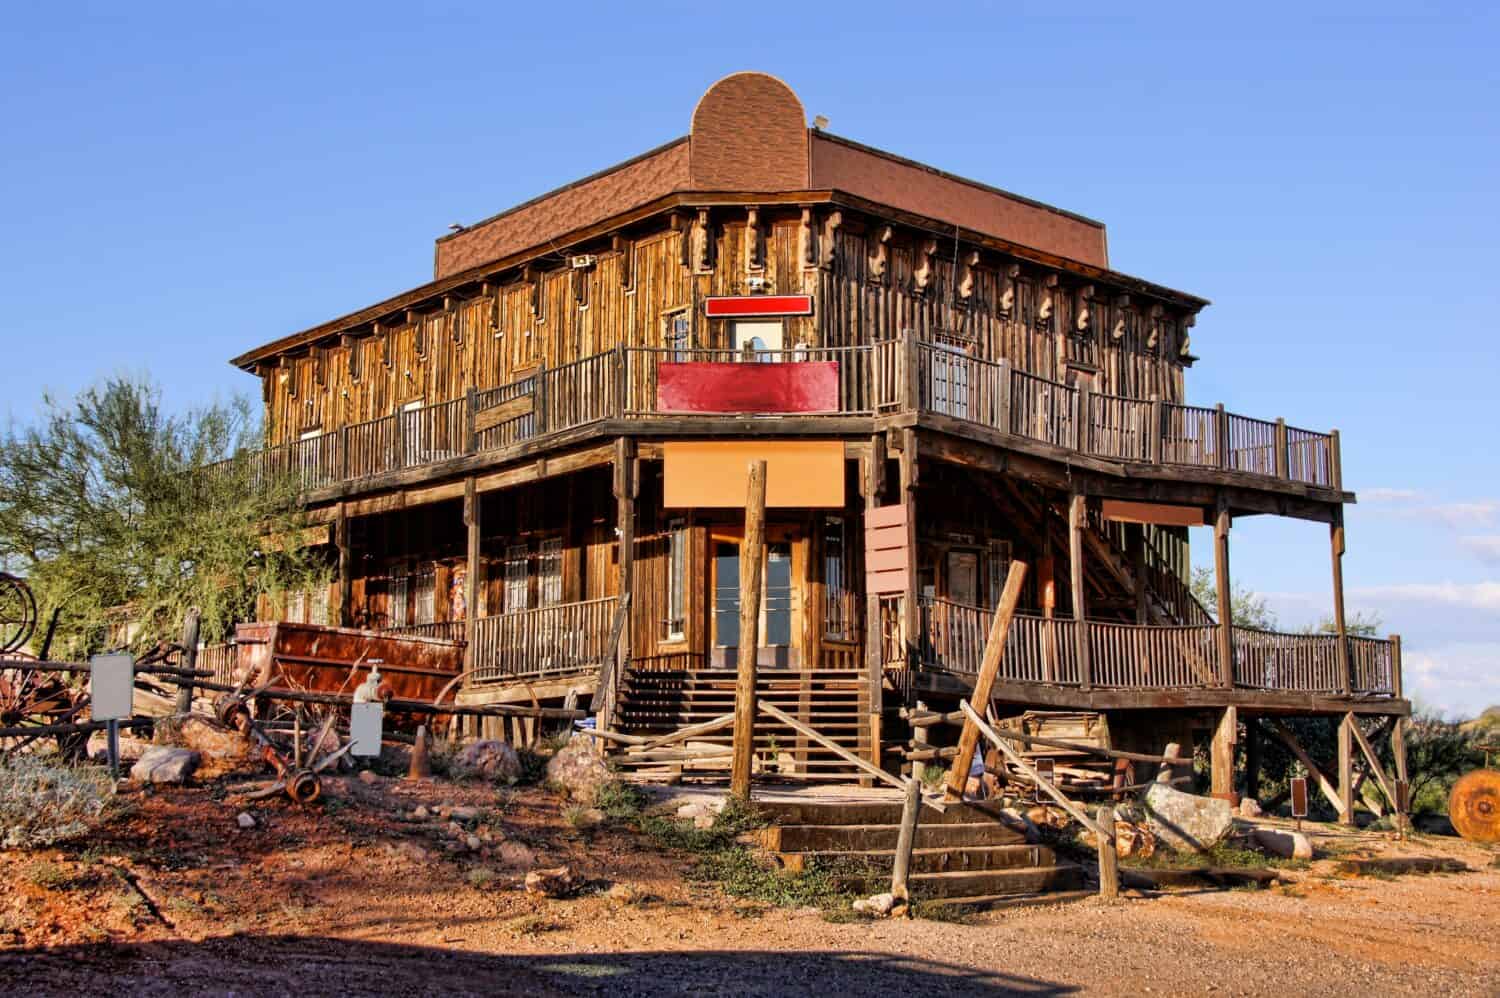 Old Wild West building in a ghost town in Arizona